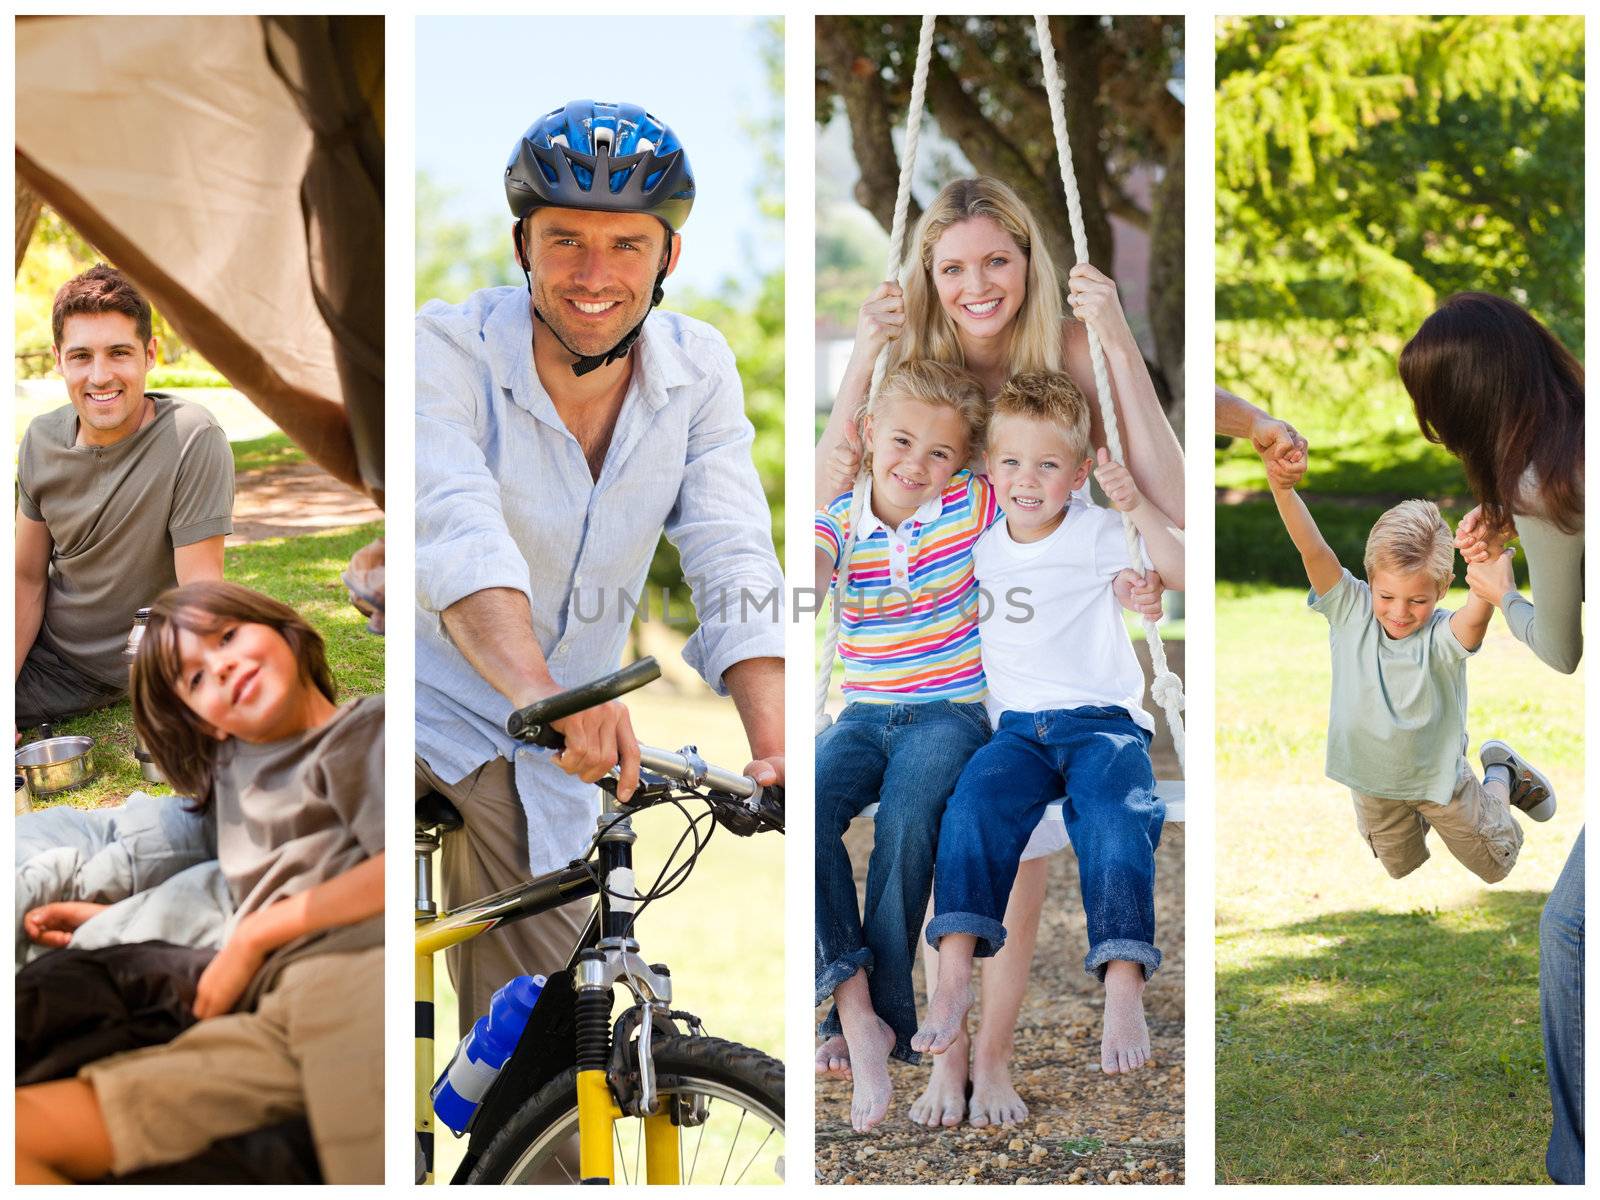 Montage of families relaxing outdoors